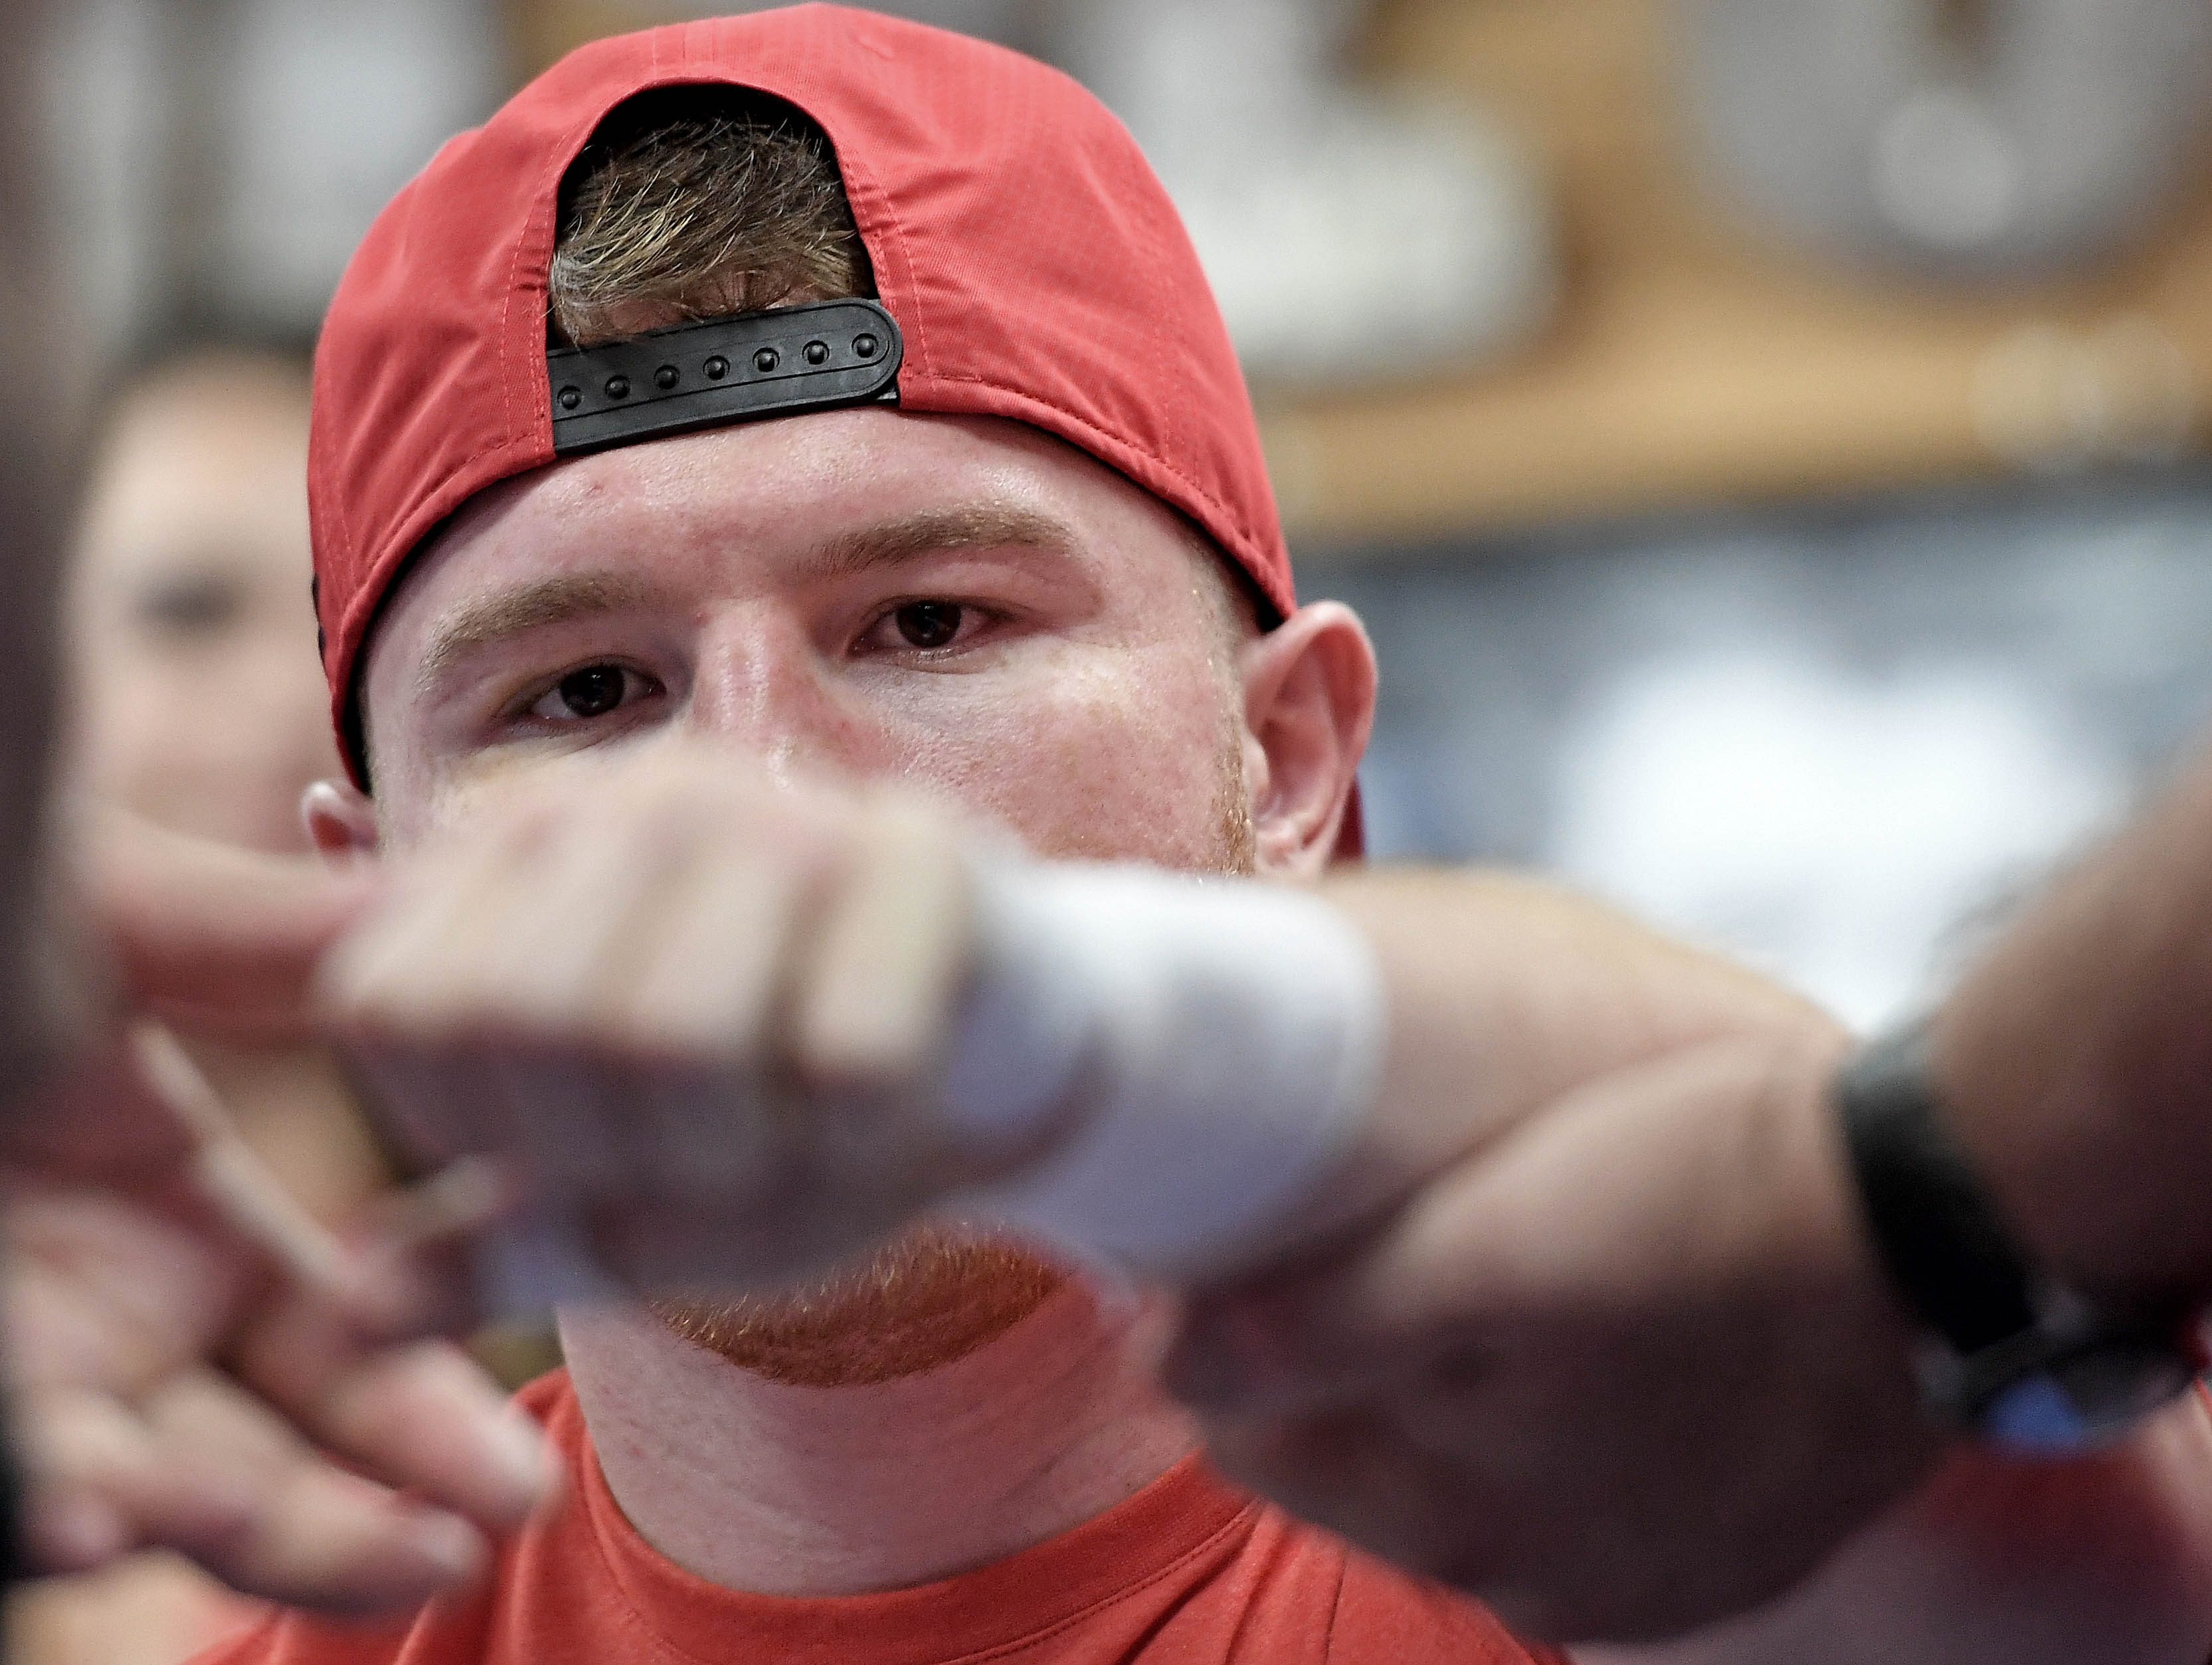 SAN DIEGO, CA - AUGUST 31: Boxer Canelo Alvarez of Mexico has his hands taped up during his Open Workout at the House of Boxing on August 31, 2016 in San Diego, California. Canelo Alvarez fights Liam Smith of Great Britain for the WBO Junior Middleweight World Championship on September 17, 2016 in Arlington, Texas.   Donald Miralle/Getty Images/AFP